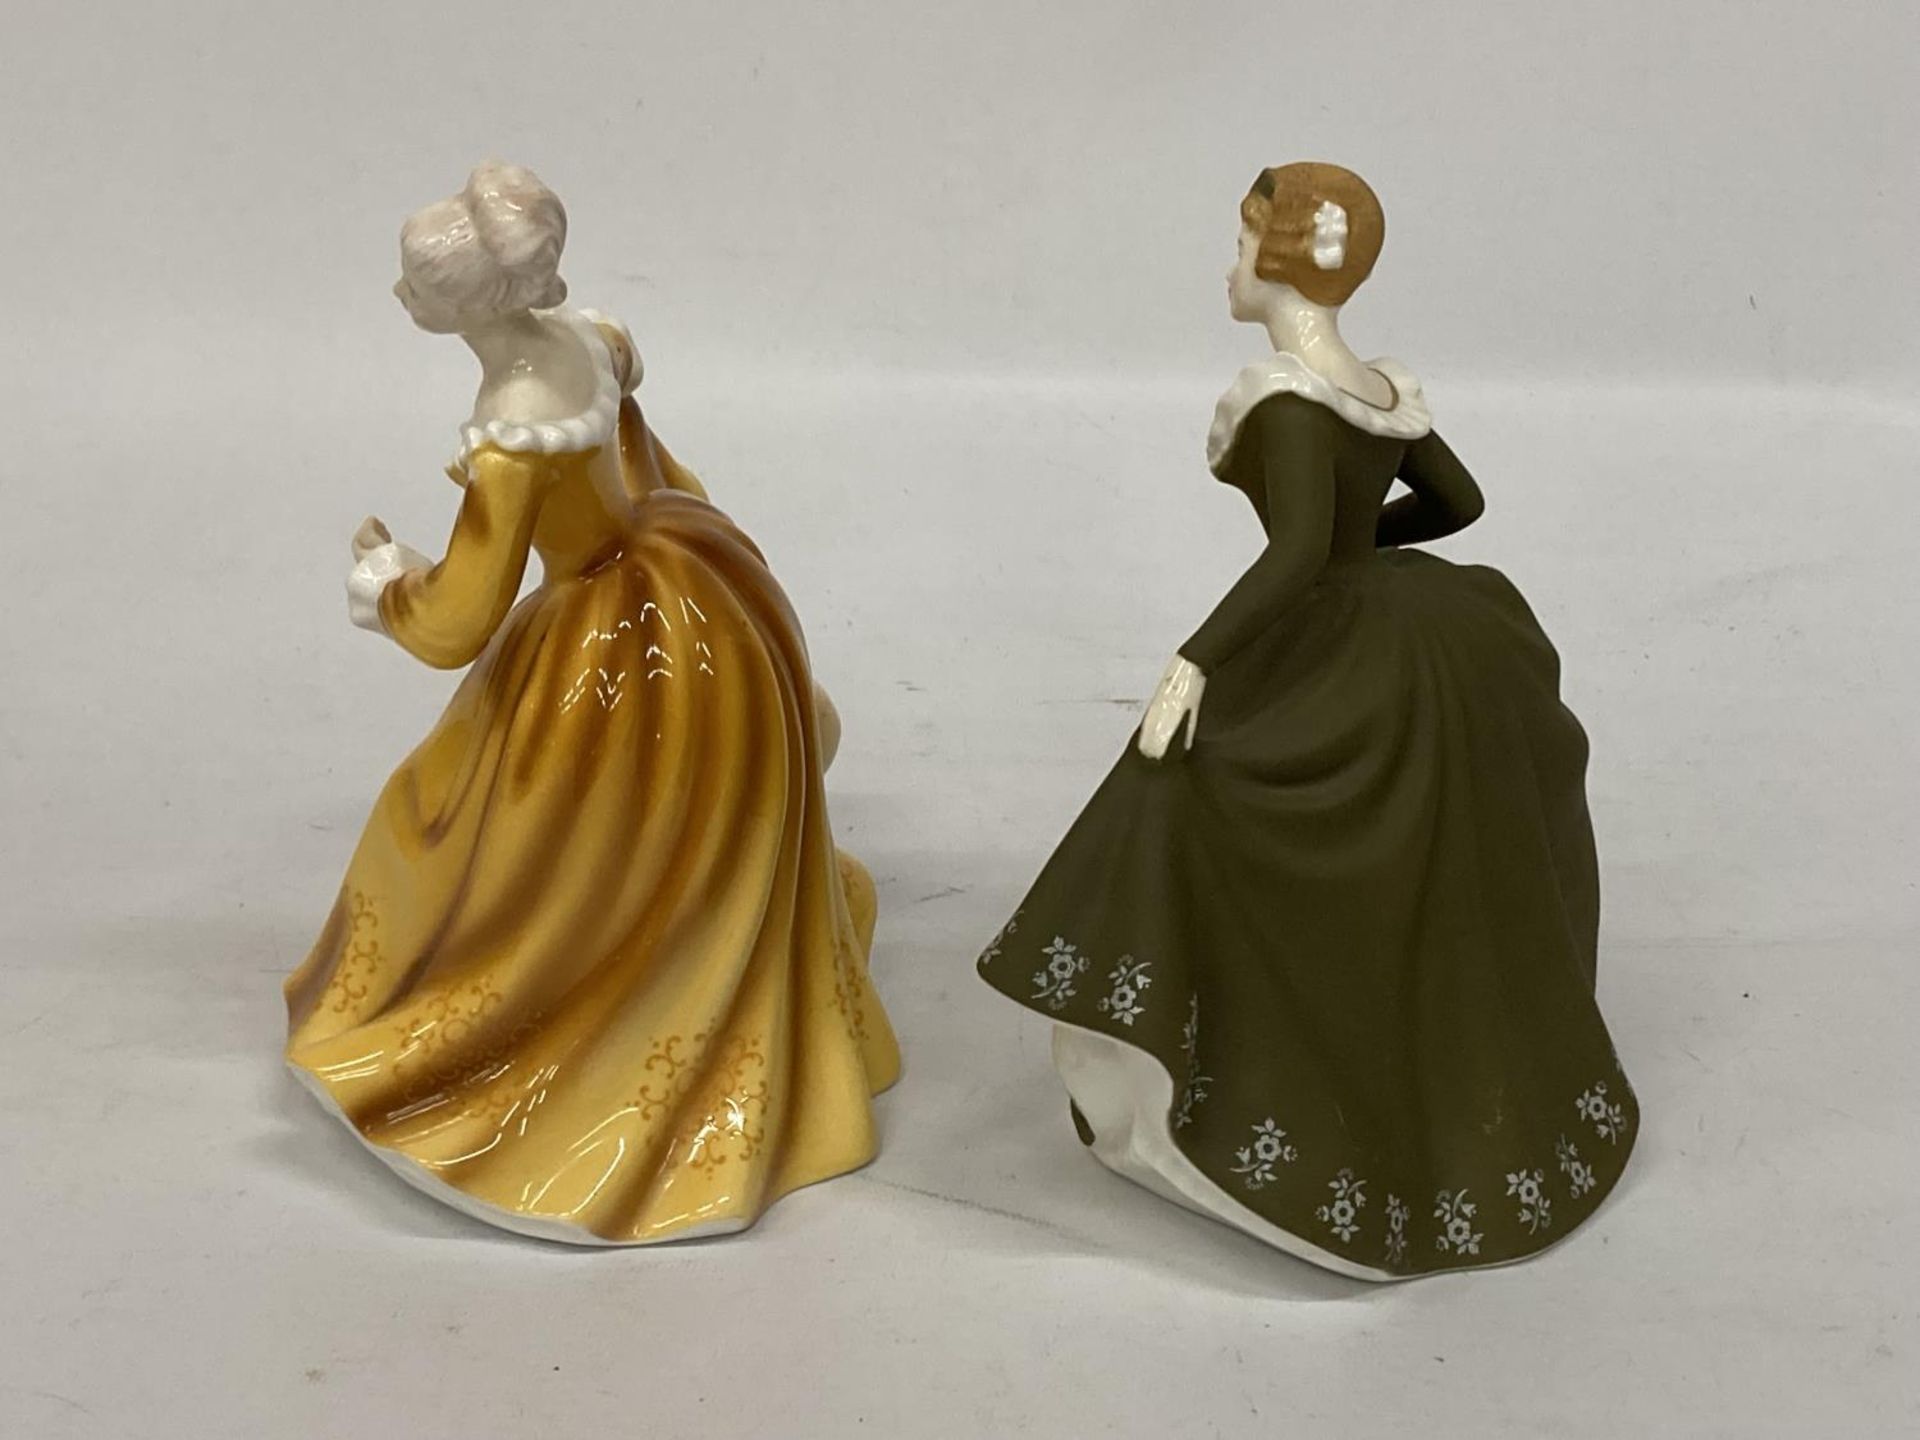 TWO ROYAL DOULTON FIGURINES "KIRSTY" HN2381 AND "GERALDINE" HN 2348 - Image 3 of 4